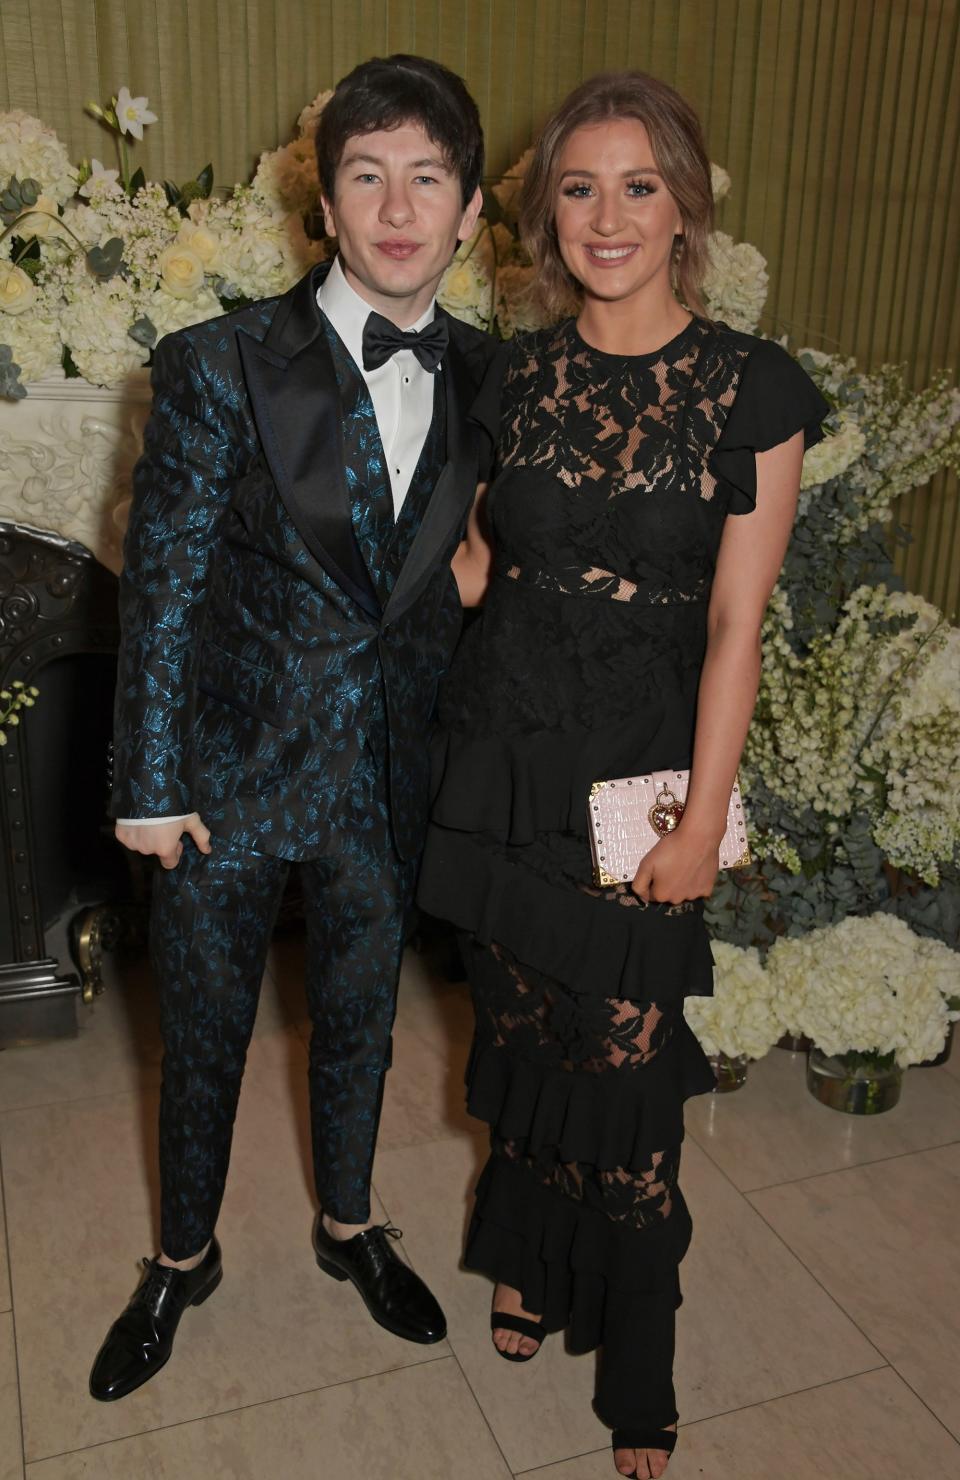 Barry Keoghan and Shona Guerin attend the British Vogue and Tiffany & Co. Celebrate Fashion and Film Party at Annabel’s